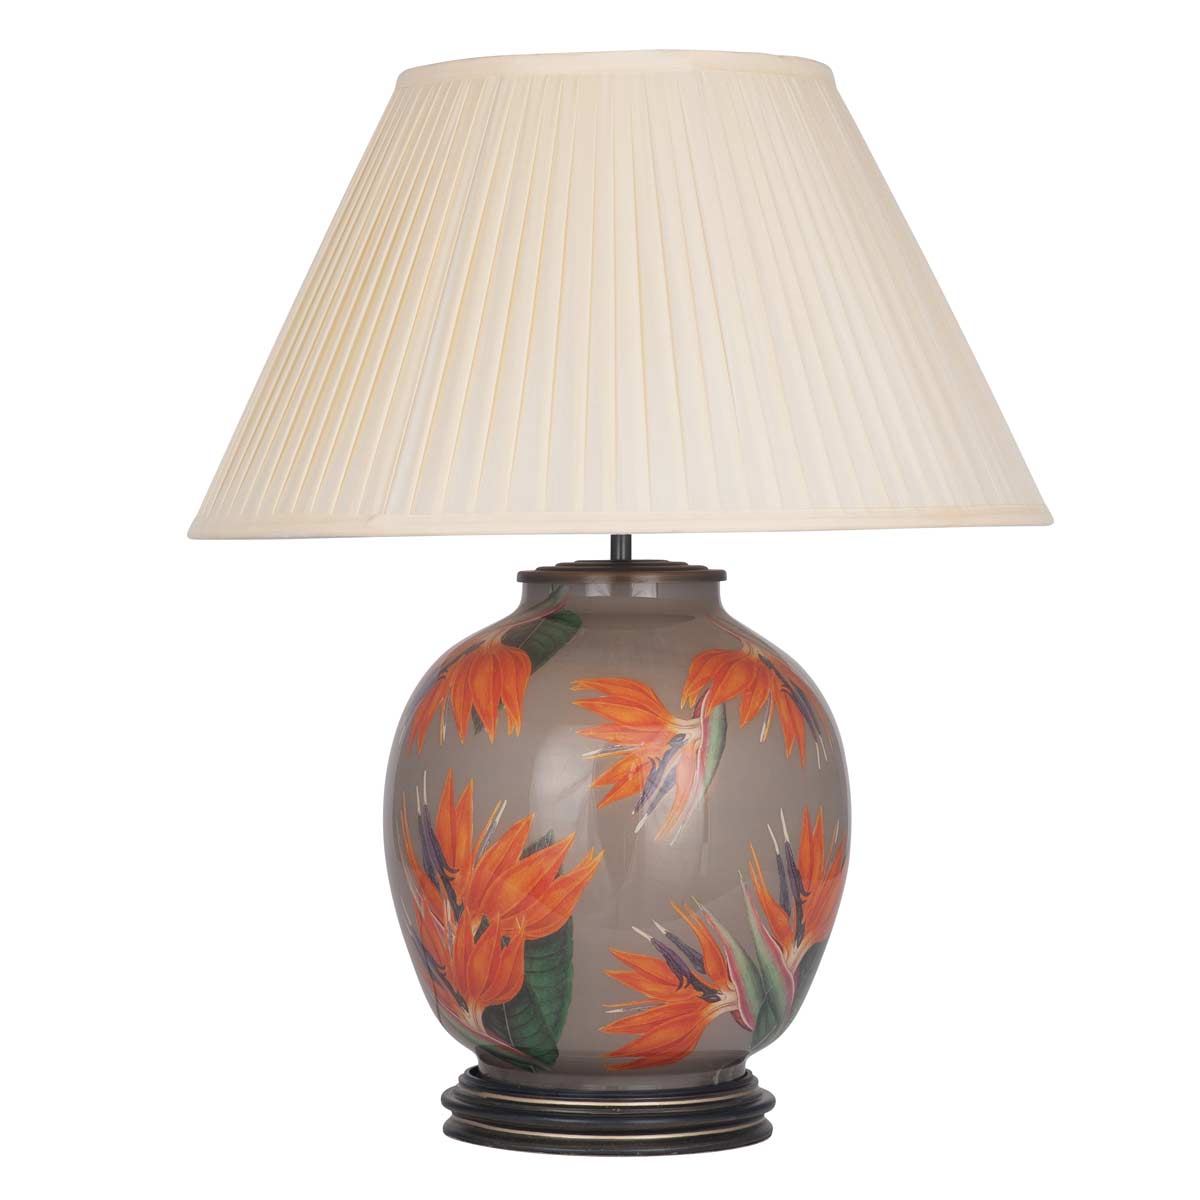 Unique table lamp with empire shade, both of which are sold by South Charlotte Fine Lighting